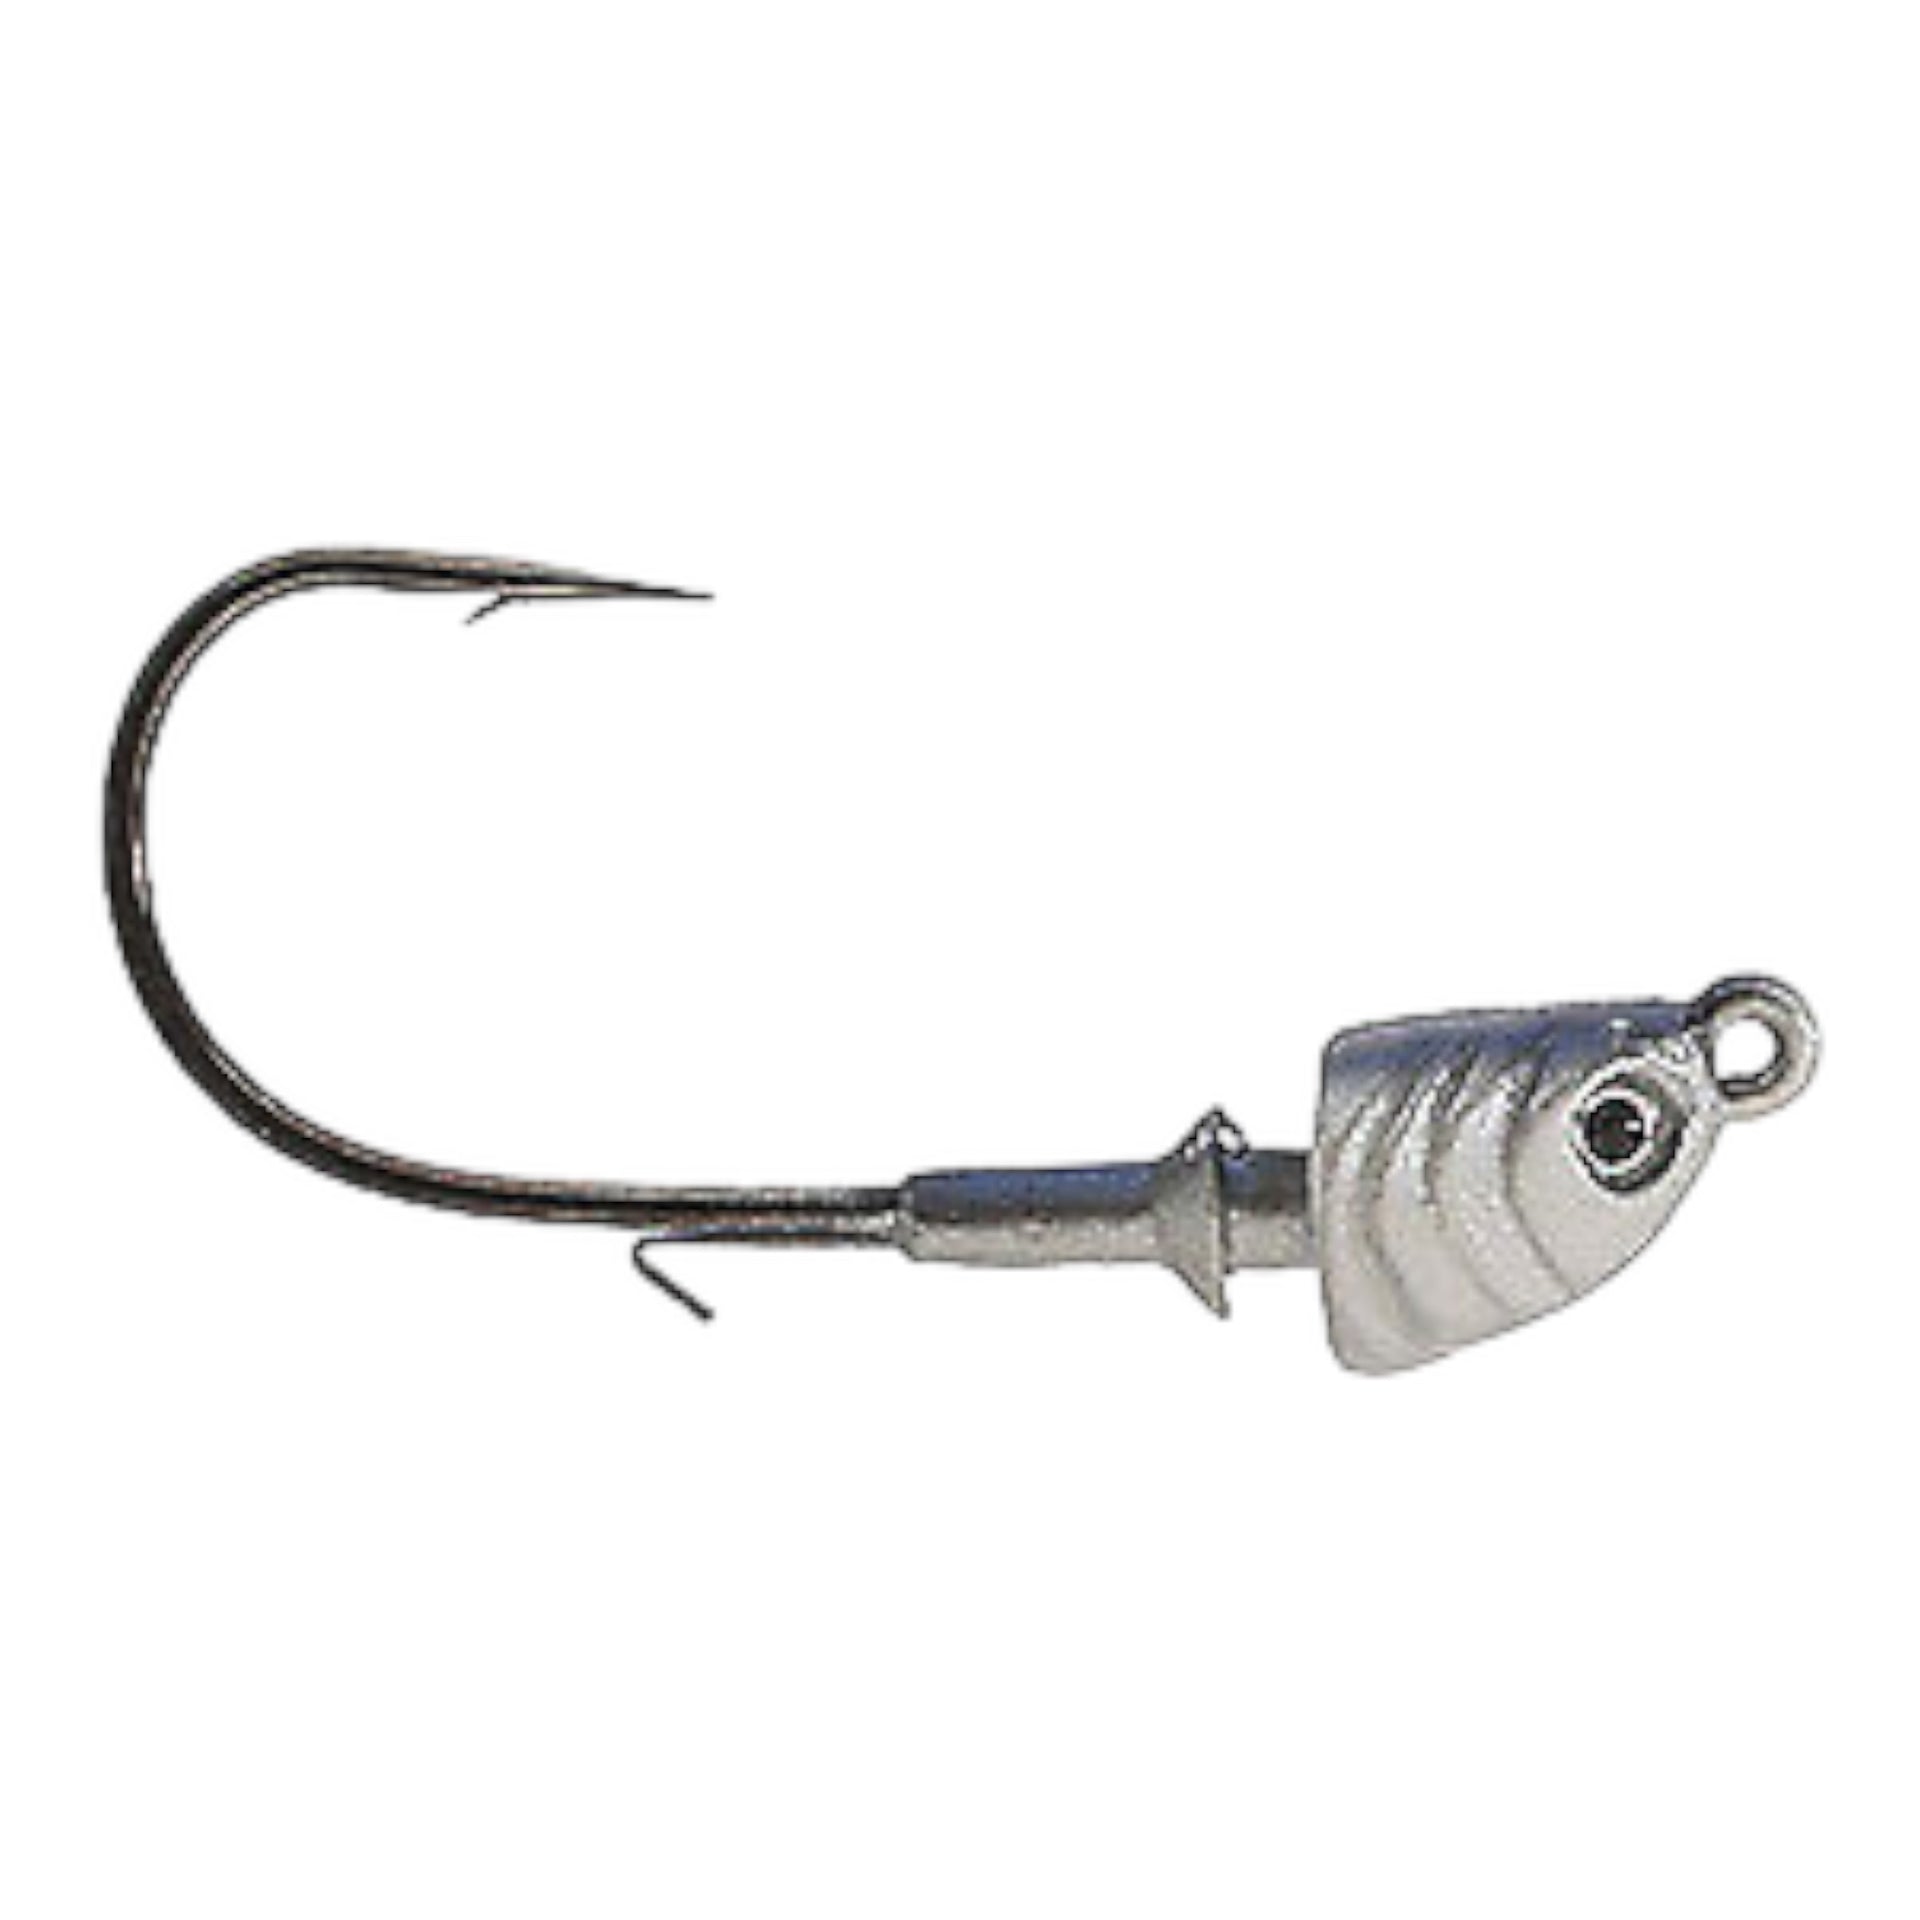 Tactical Bassin Underspin – The Hook Up Tackle